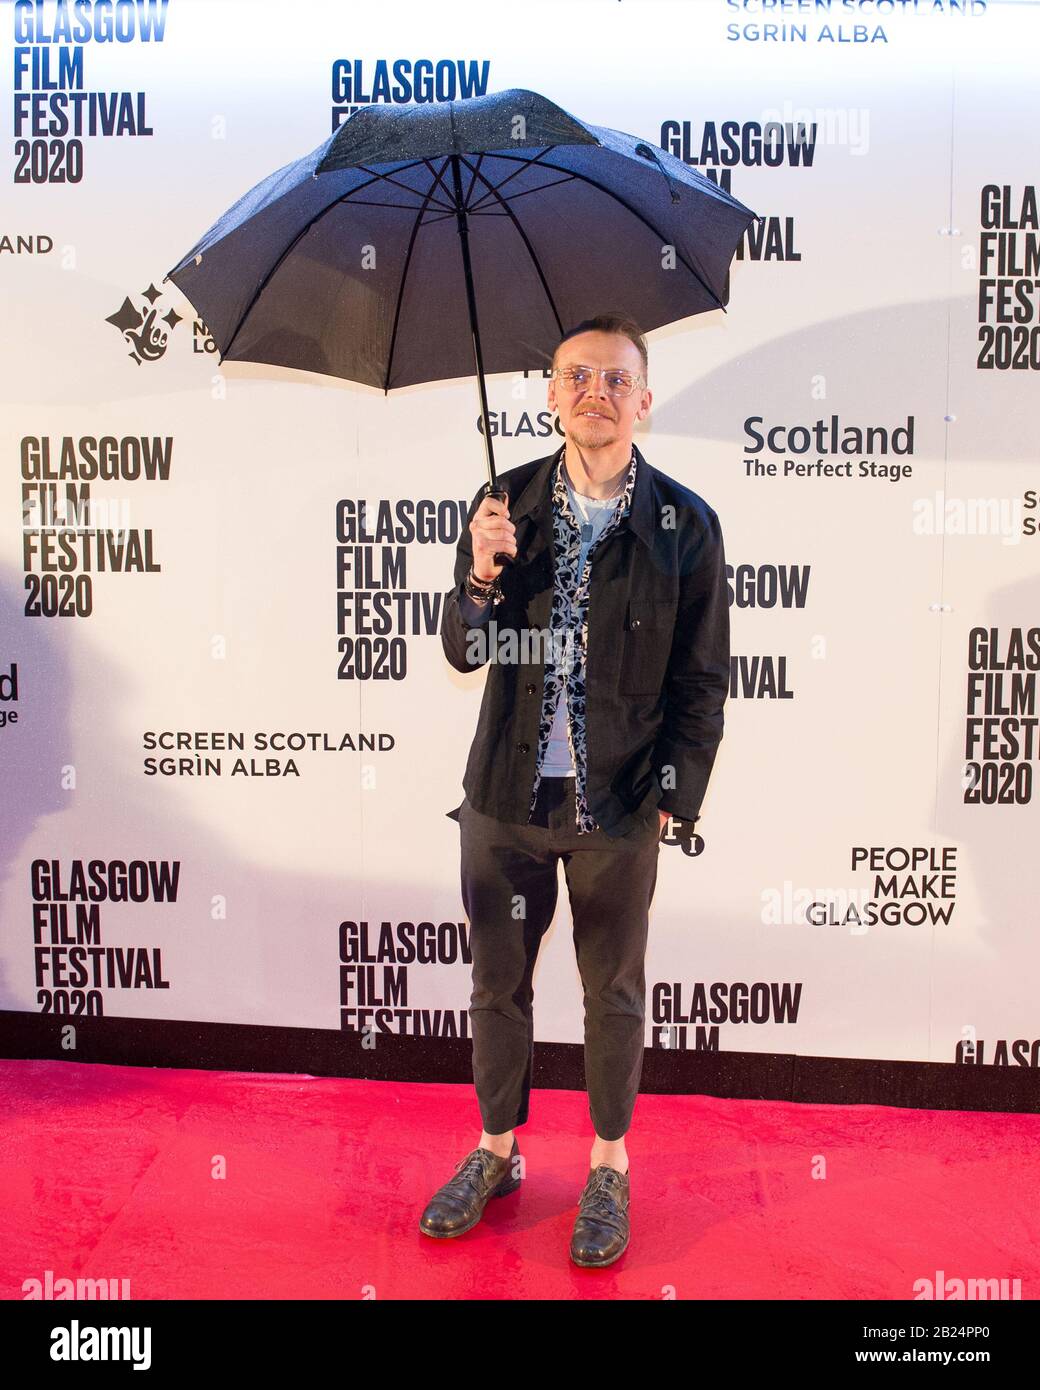 Glasgow, UK. 29 February 2020. Pictured: Simon Pegg - Actor  UK Premiere of ‘Lost Transmissions’ at the Glasgow Film Festival 2020 on thee red carpet outside of the Glasgow Film Theatre. Credit: Colin Fisher/Alamy Live News. Stock Photo